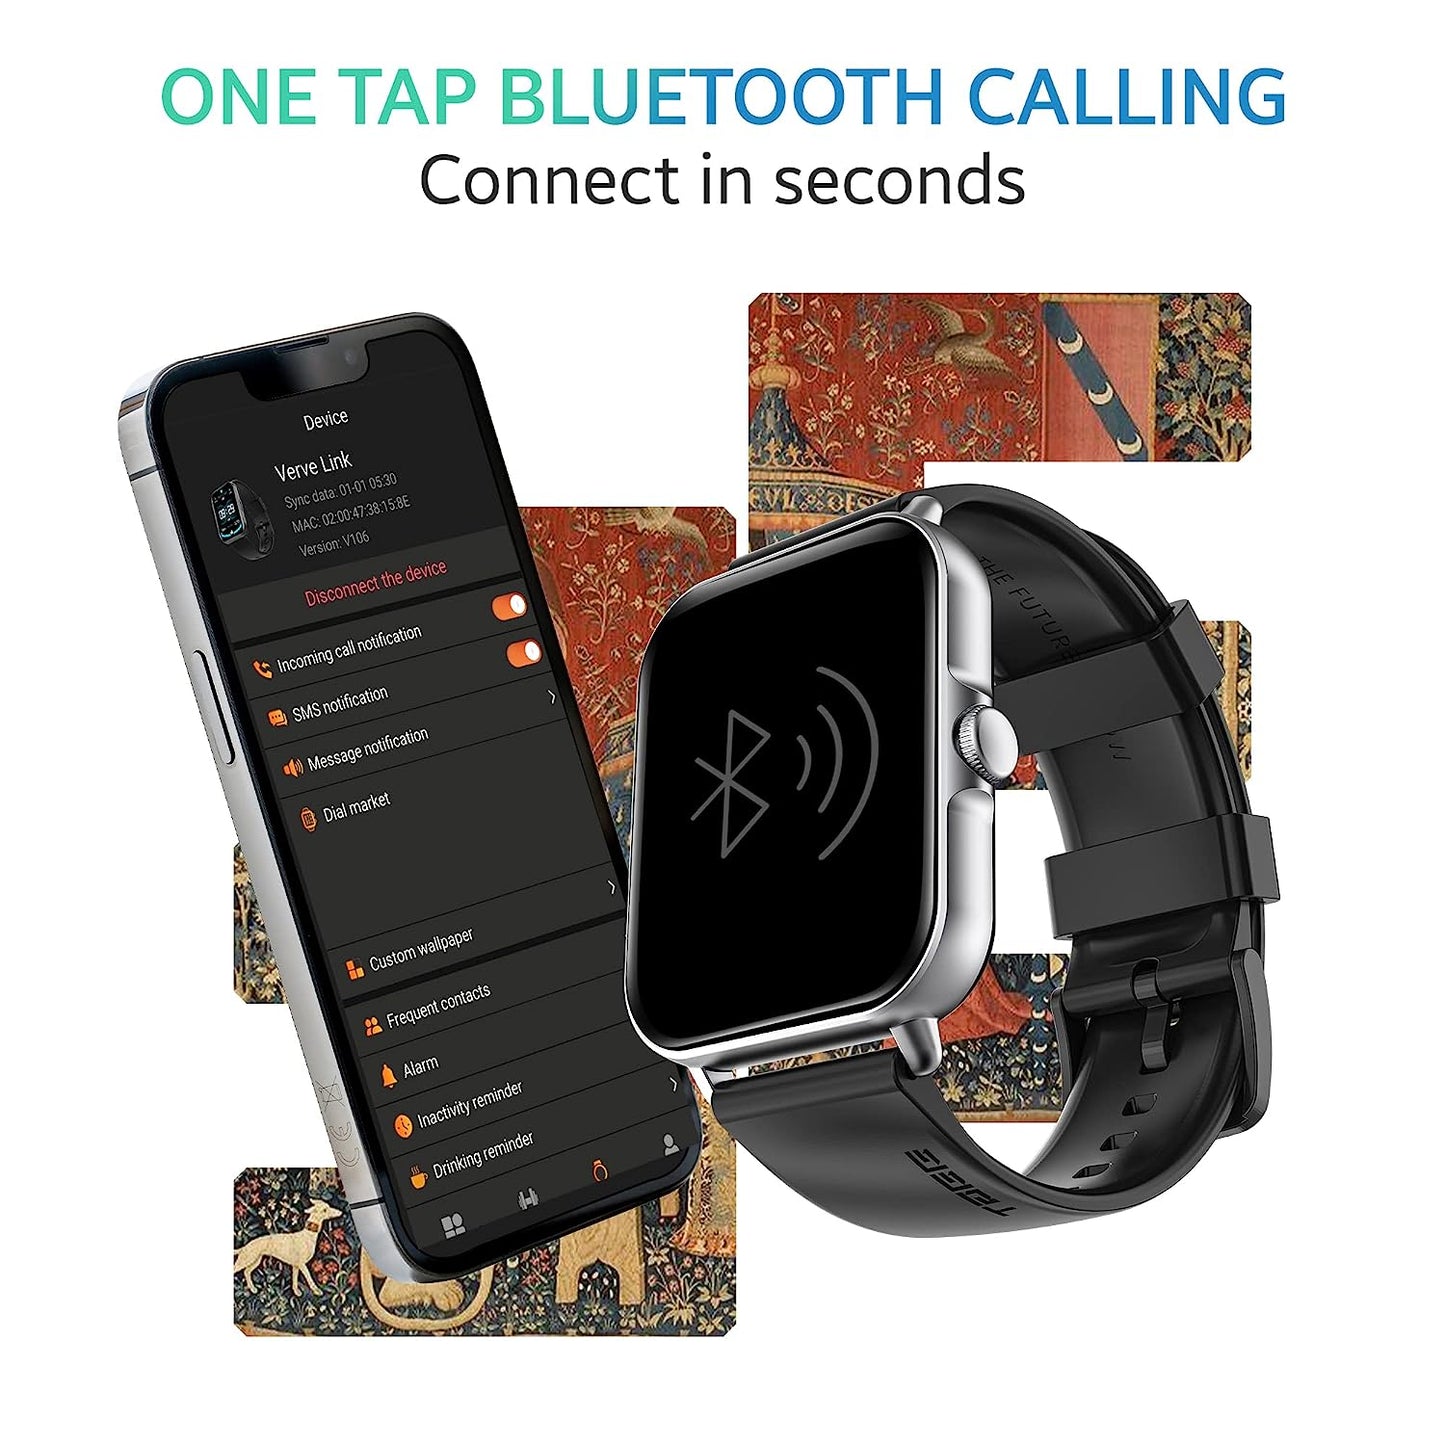 TAGG Engage Lite Advanced Calling Smartwatch with Split Screen Function | Single Chip Technology | Fast Charge 10 min = 1 Day Usage | AI Voice Assistant | Built-In Games, Calculator, Stopwatch & Timer